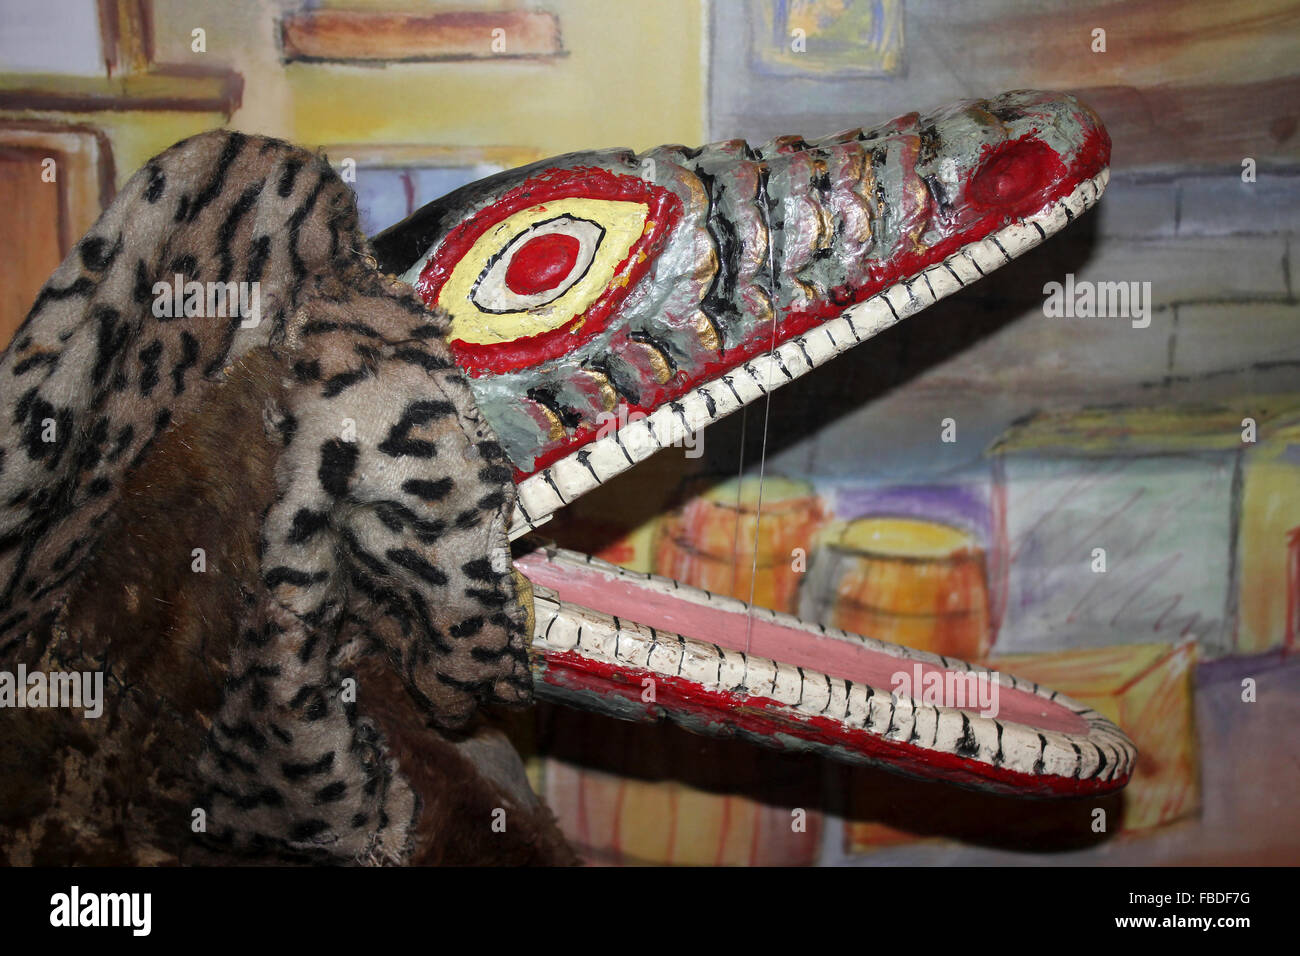 Crocodile Puppet From Punch & Judy Show Stock Photo